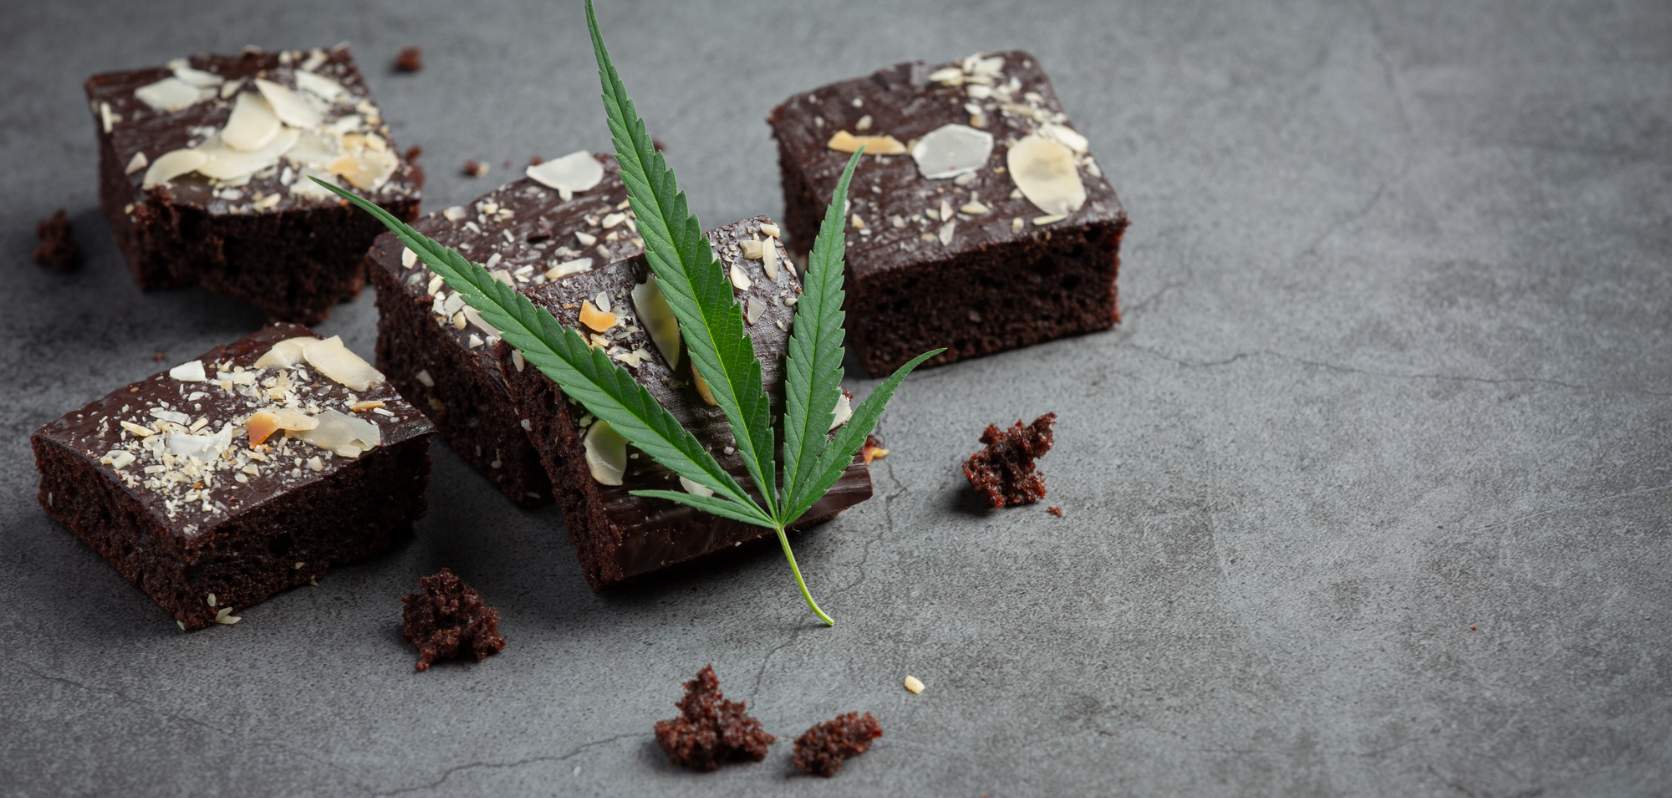 However, if you want to start baking and create something salivating, you need to learn how to make a weed chocolate cake. 